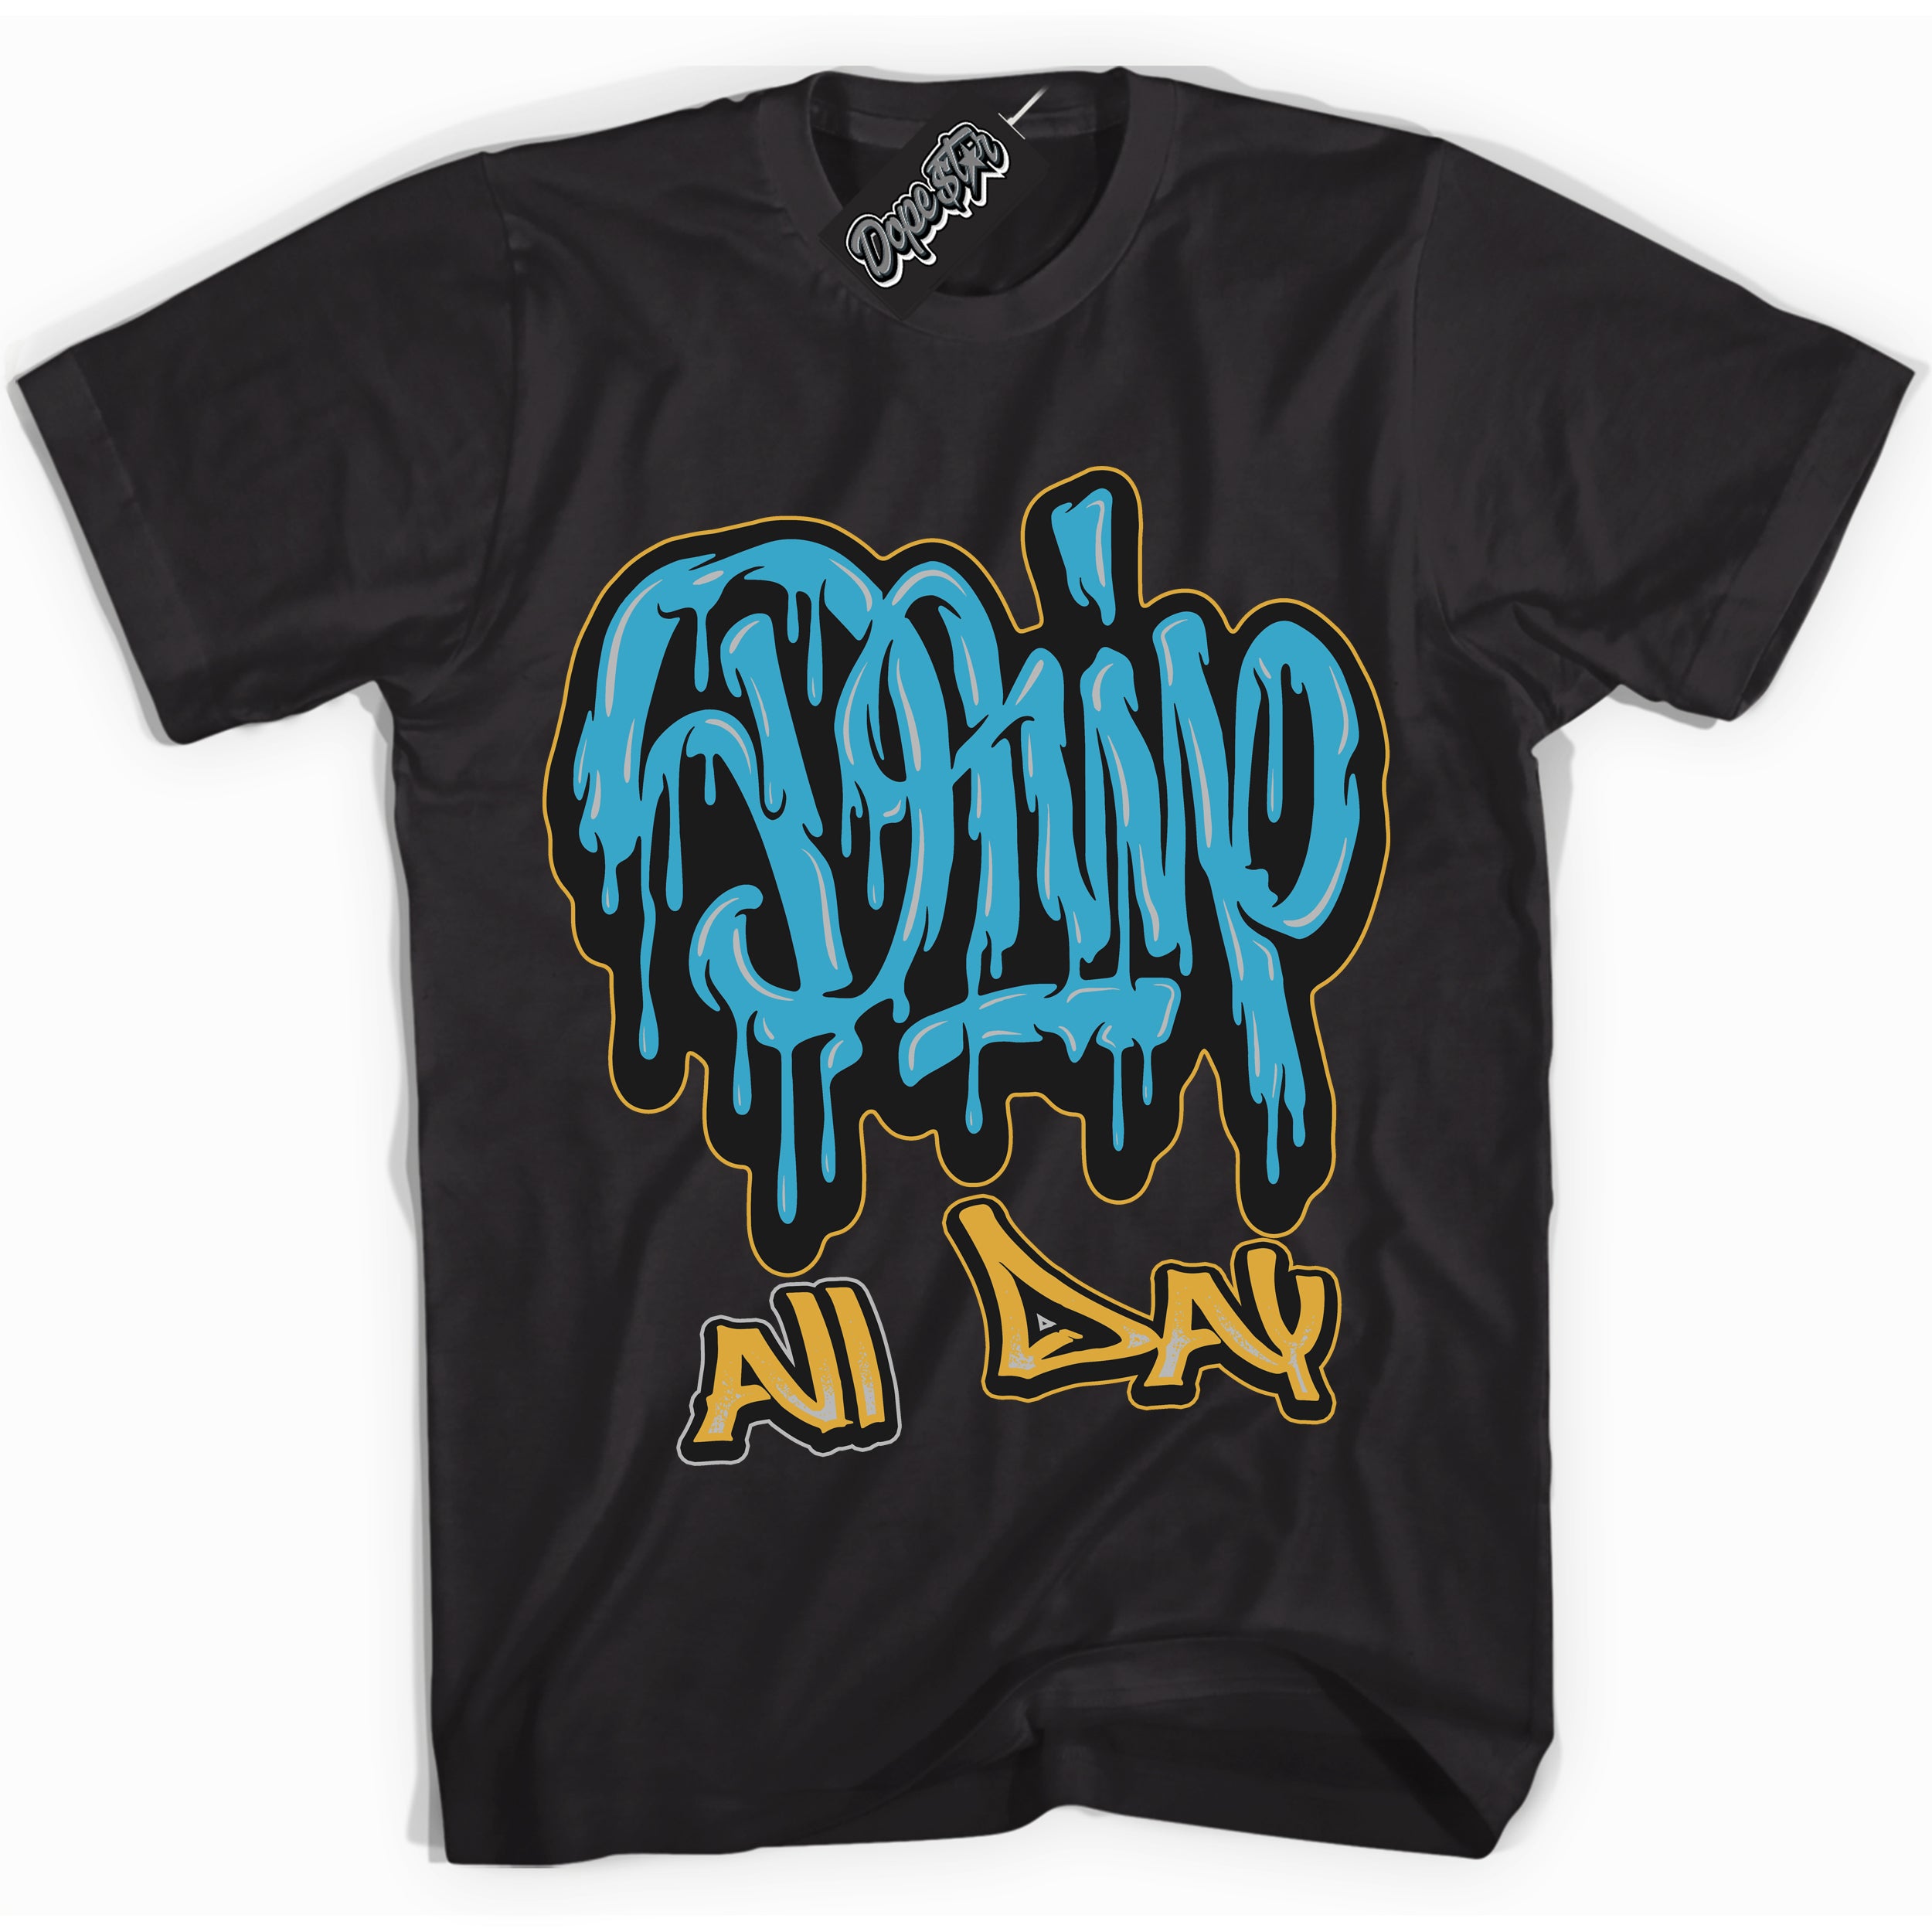 Cool Black Shirt with “ Drip All Day” design that perfectly matches Aqua 5s Sneakers.